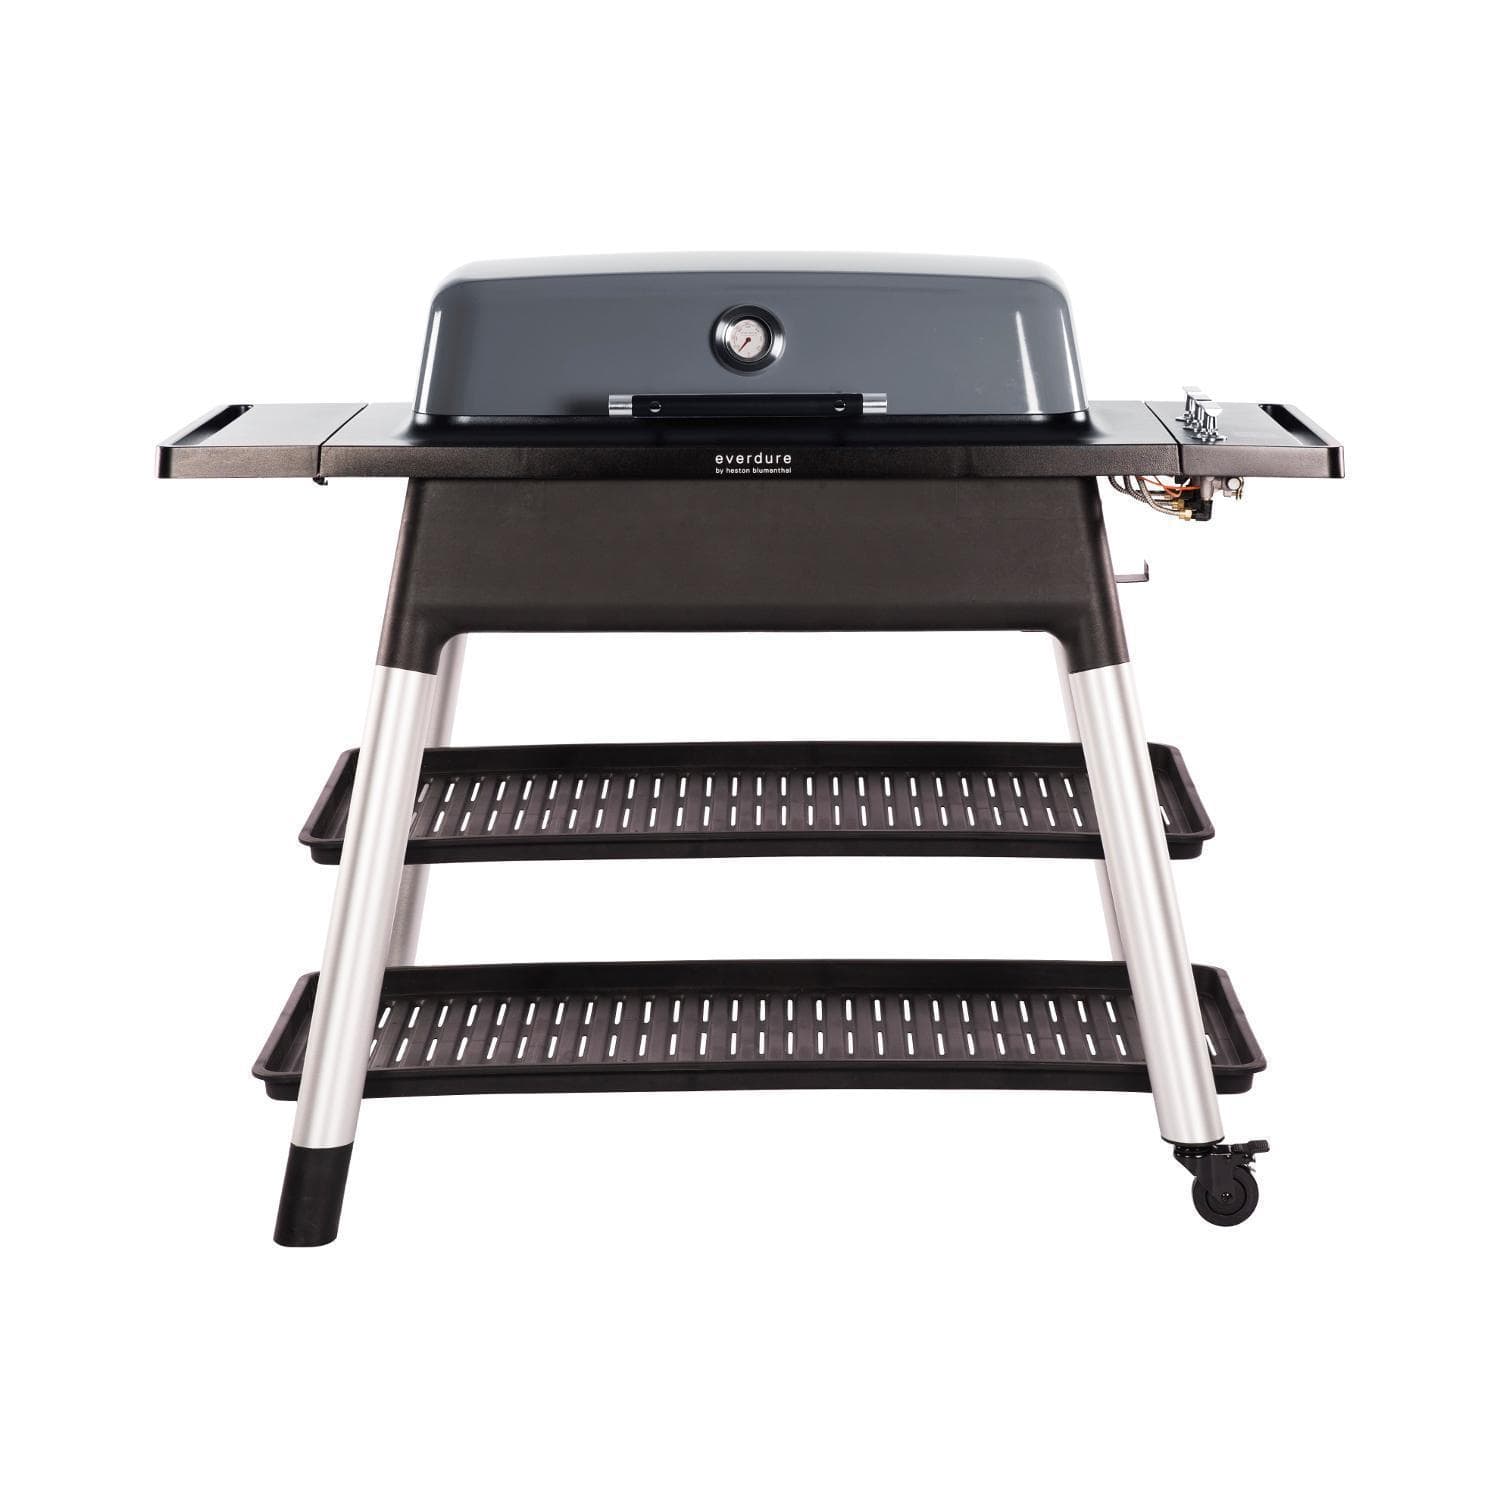 Everdure Propane Gas Grill Graphite Everdure By Heston Blumenthal FURNACE 52-Inch 3-Burner Propane Gas Grill With Stand